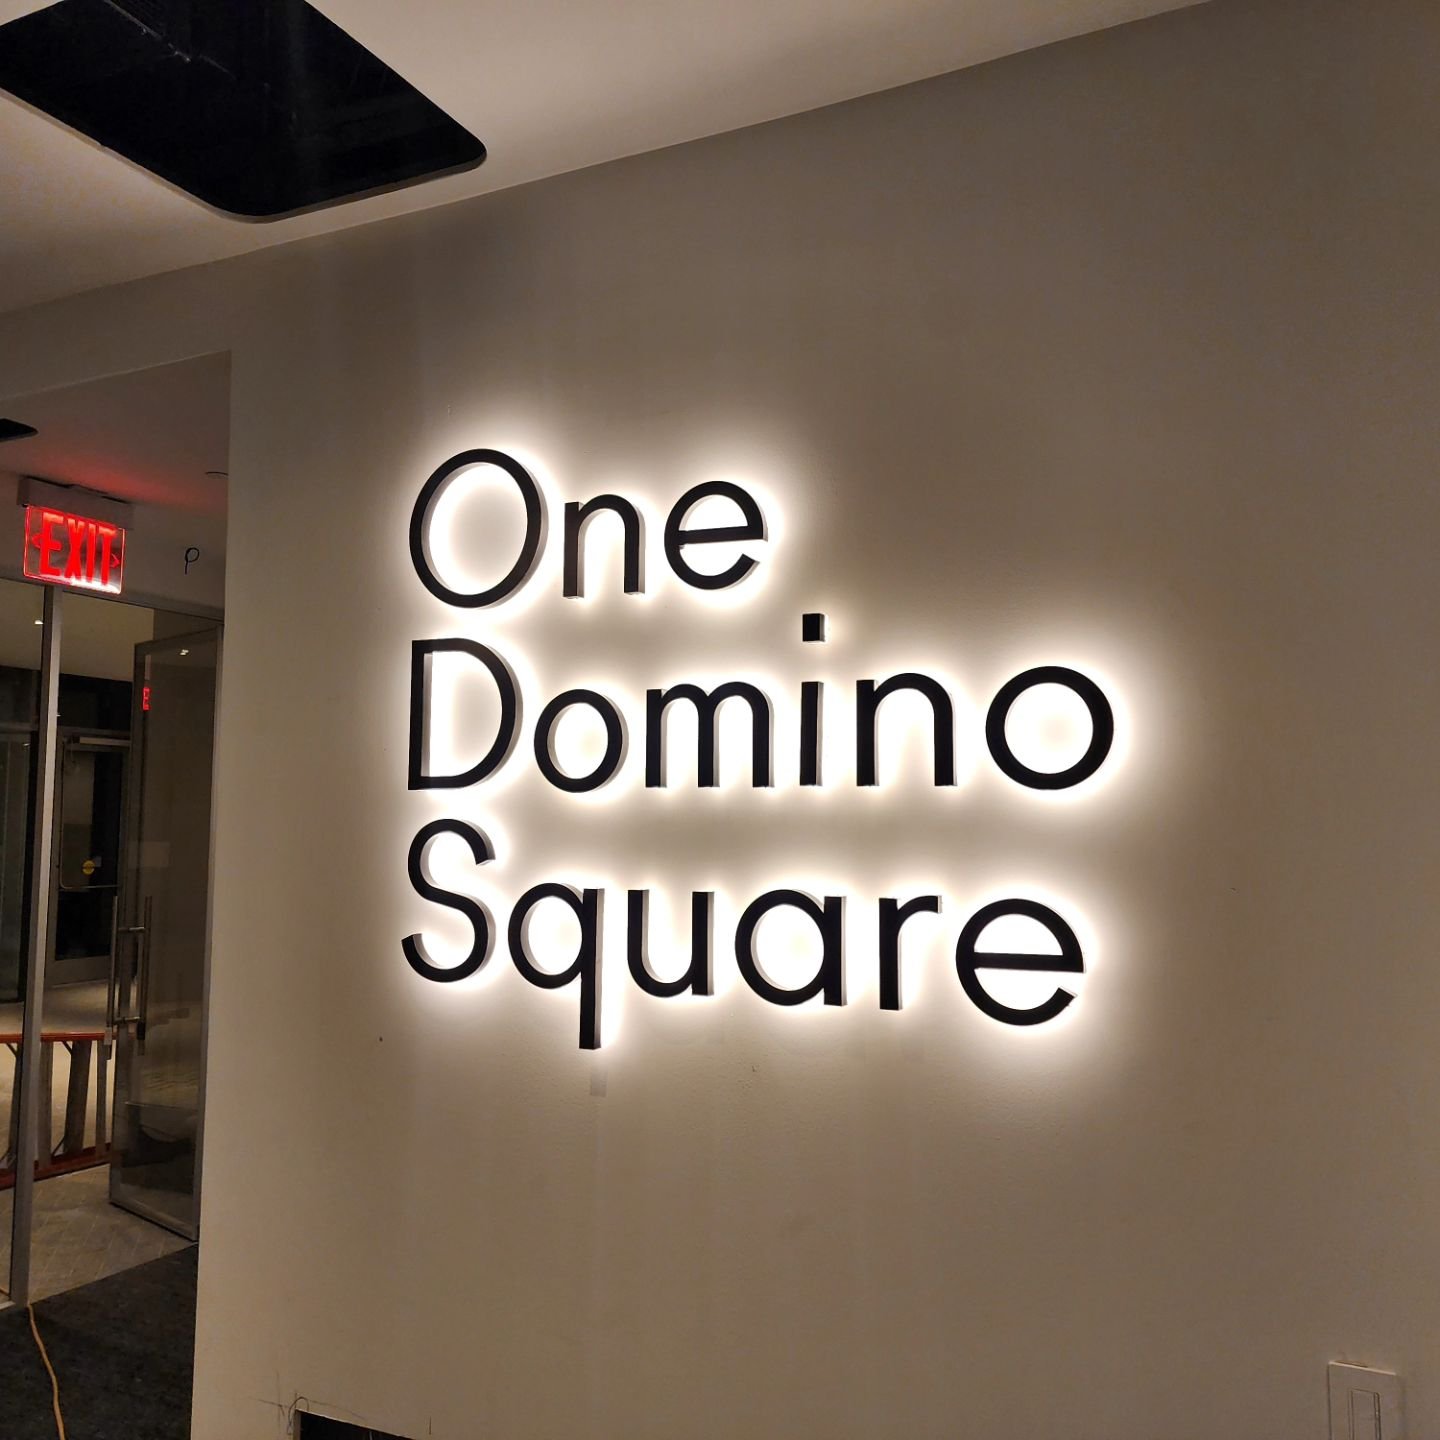 Custom Fabricated 3d backlit metal logo / letters painted black with warm white leds behind for backlit illumination installed interior lobby of hi-rise luxury apartment building in DUMBO Brooklyn.